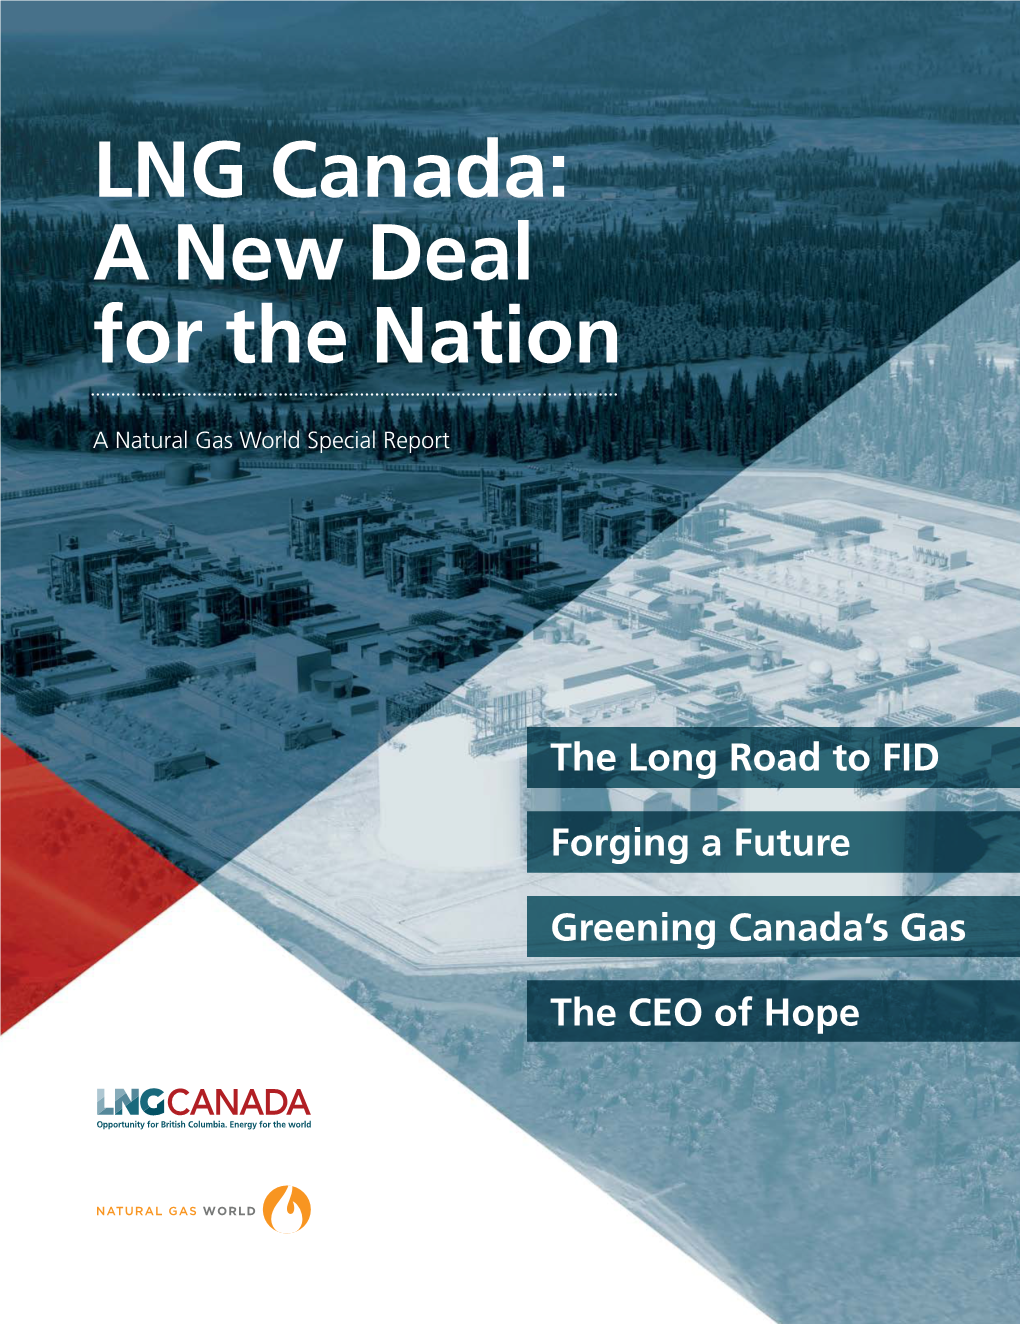 LNG Canada: a New Deal for the Nation